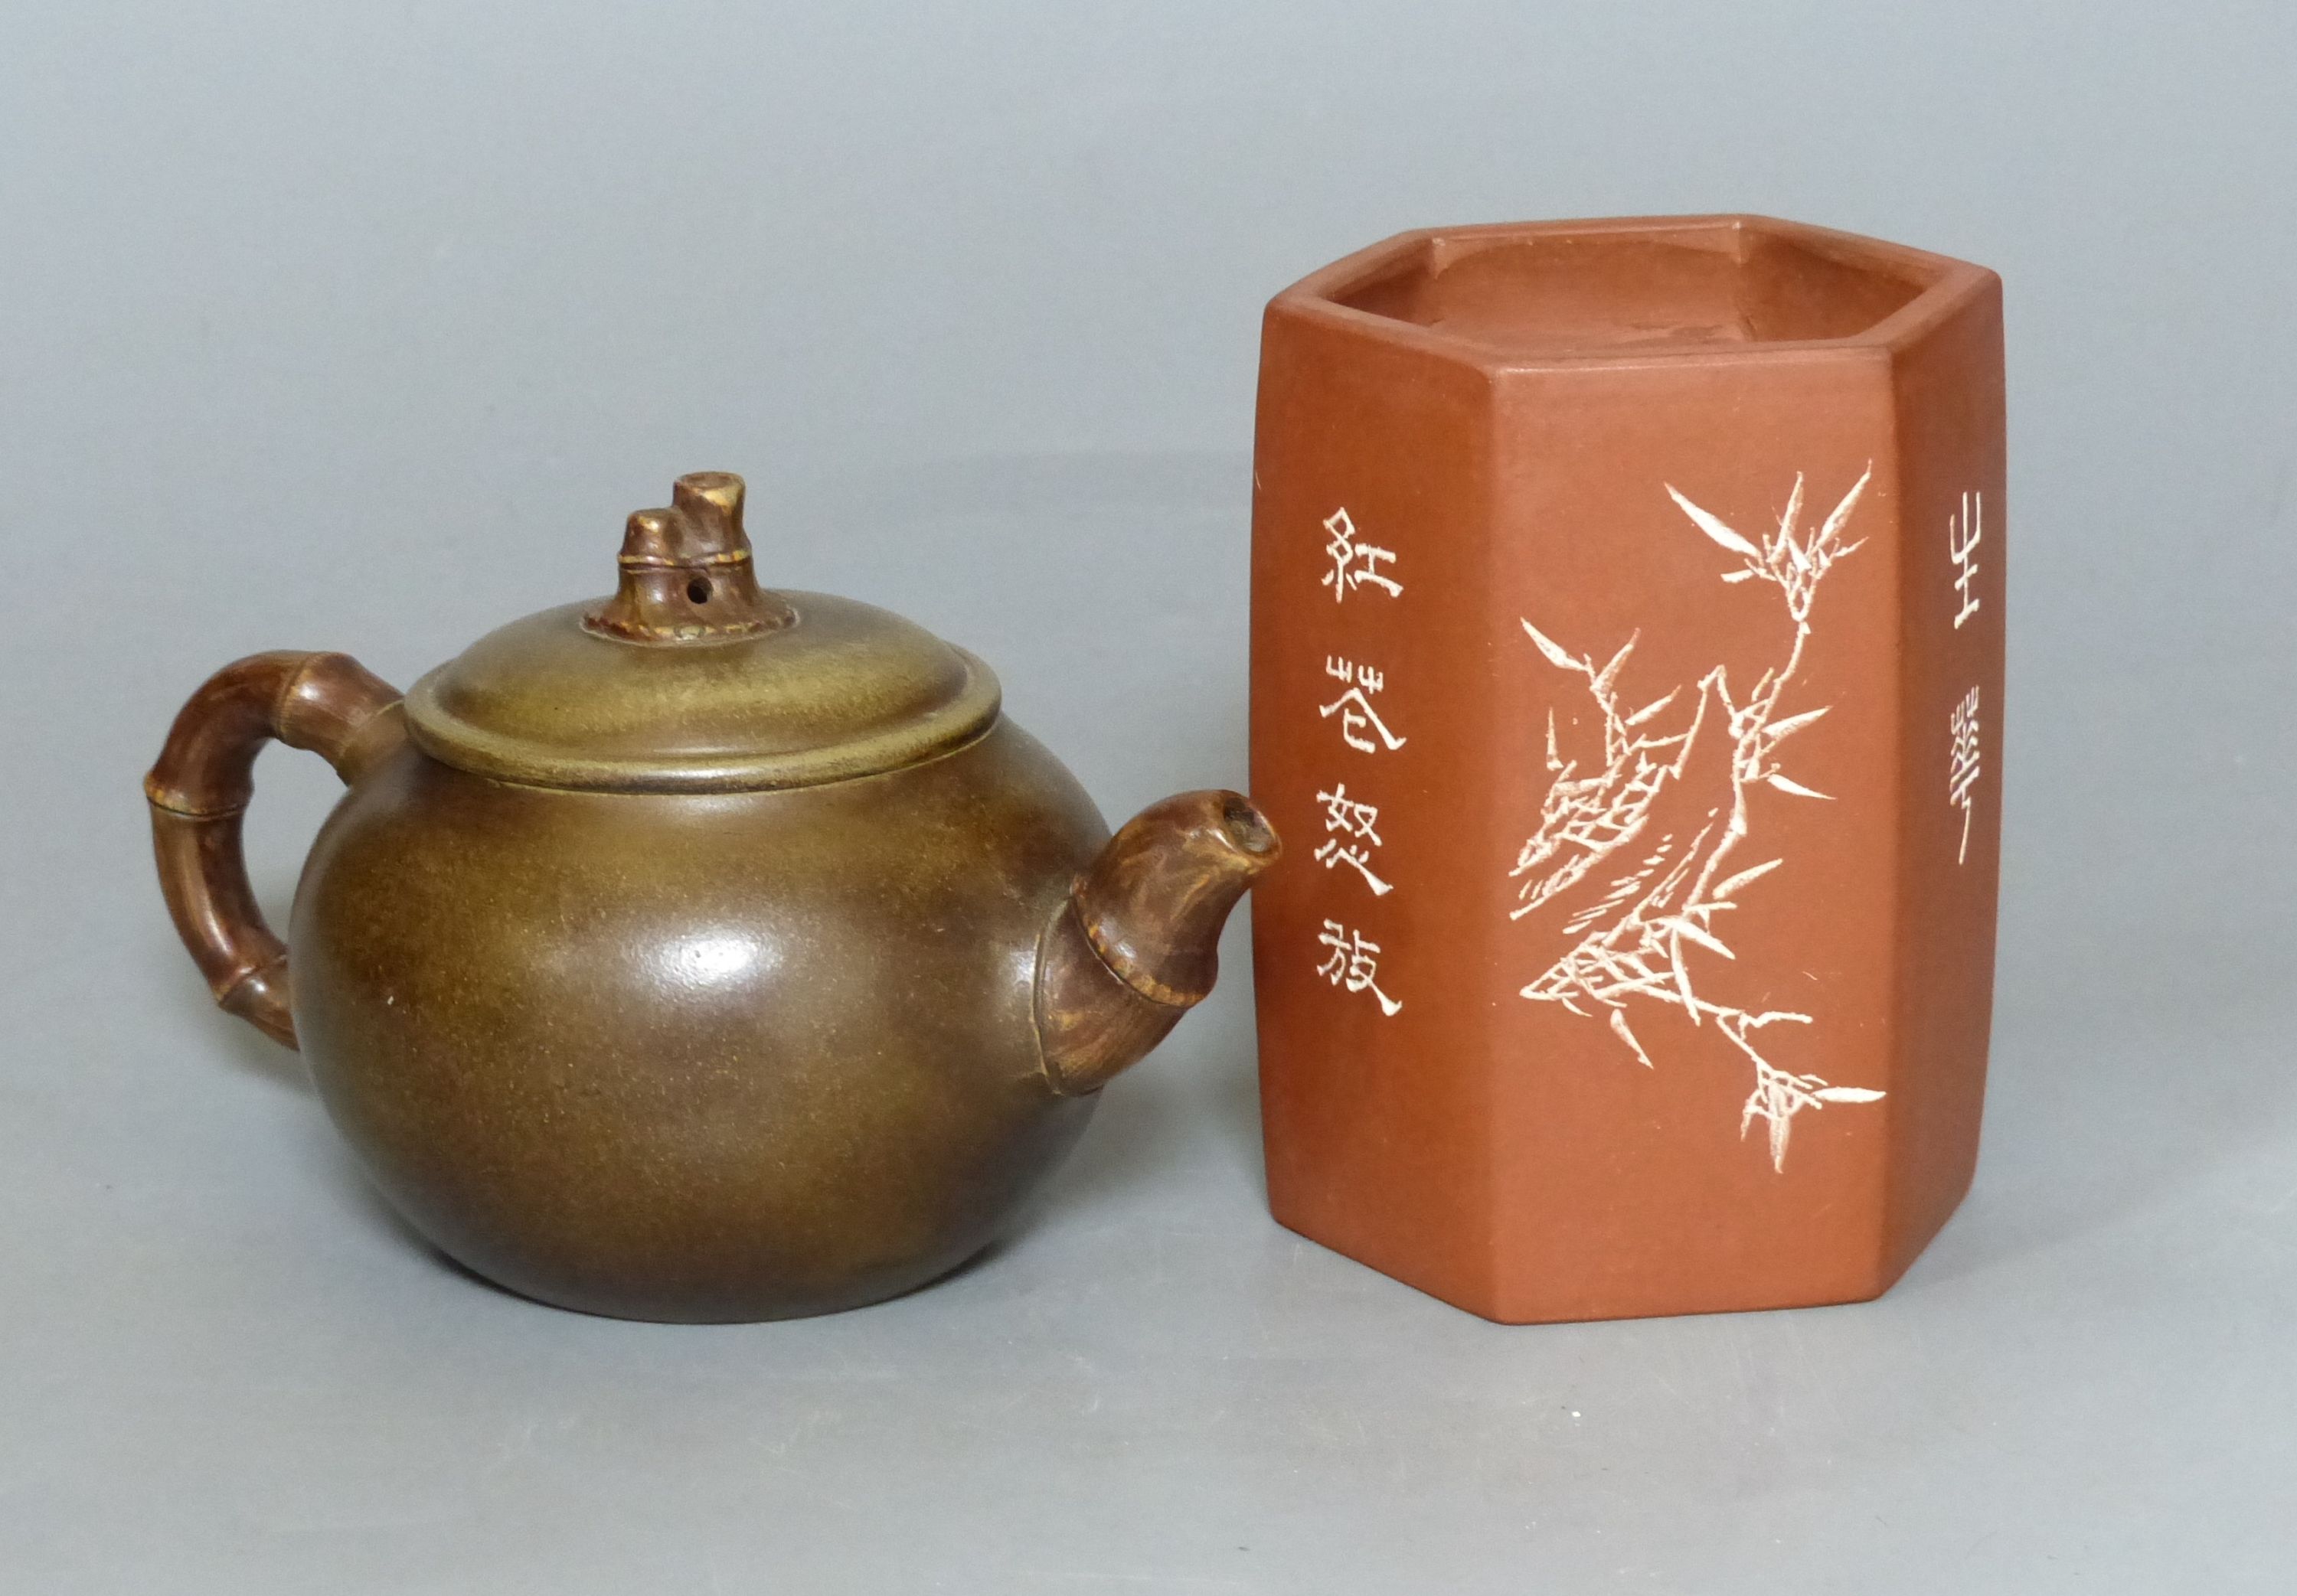 A Chinese Yixing teapot and brush pot with calligraphy and signatures, tallest 12cm